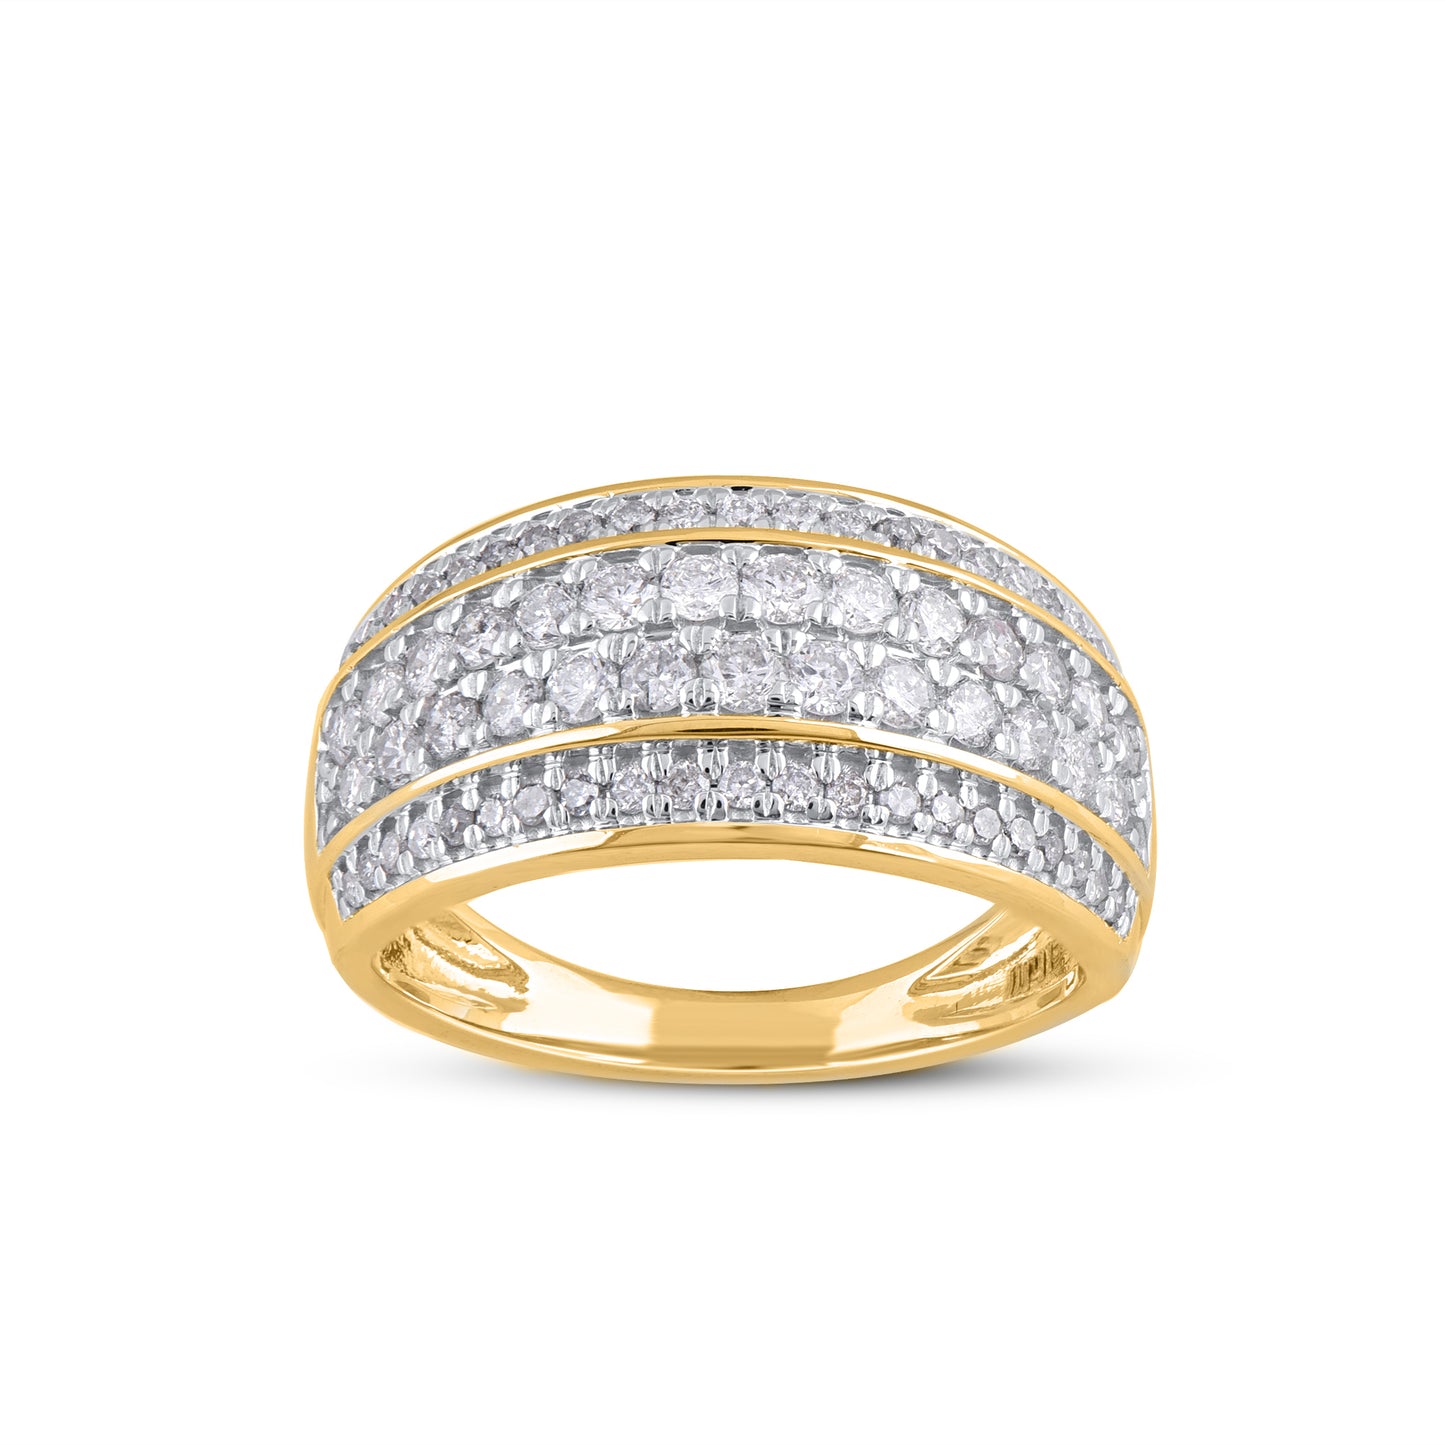 Multi-Row Statement Wedding Band in 14k Gold